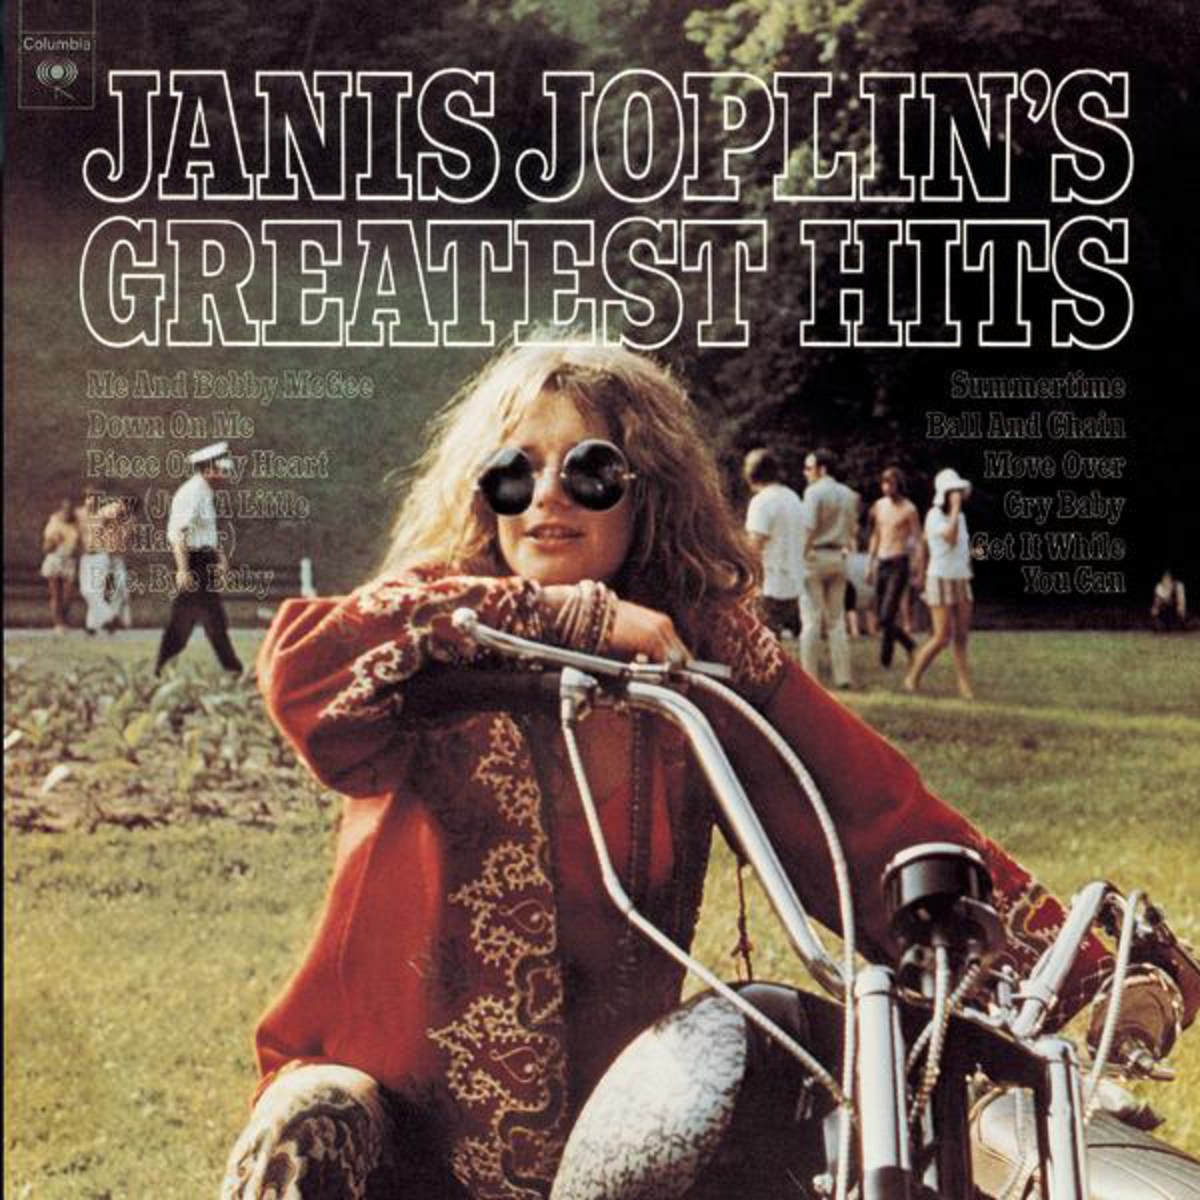 Summertime ((Big Brother & The Holding Company-Janis Joplin))